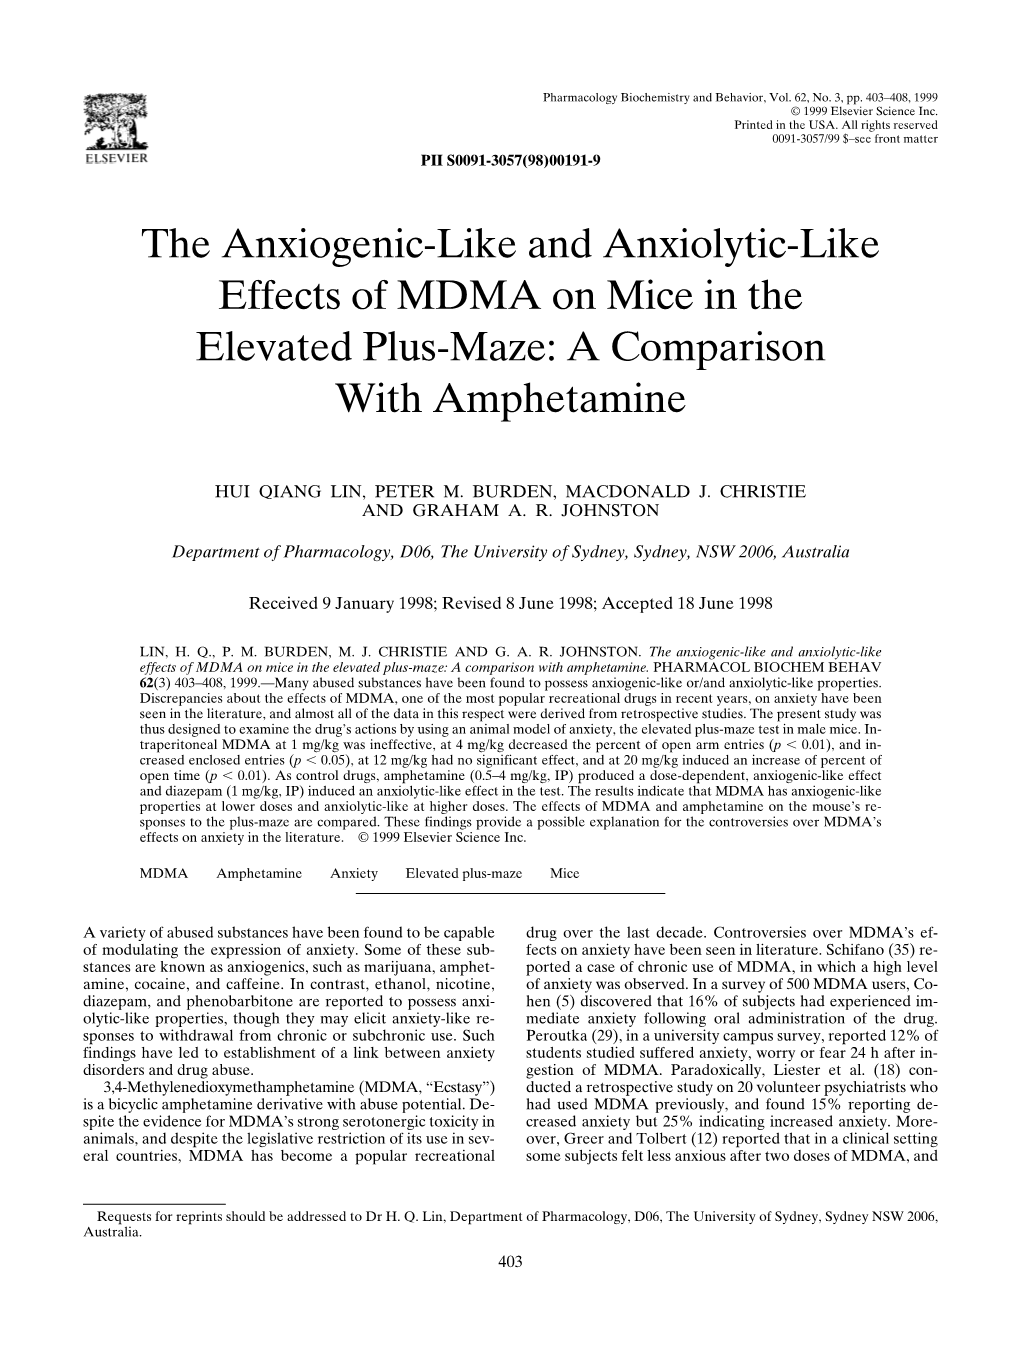 The Anxiogenic-Like and Anxiolytic-Like Effects of MDMA on Mice in the Elevated Plus-Maze: a Comparison with Amphetamine